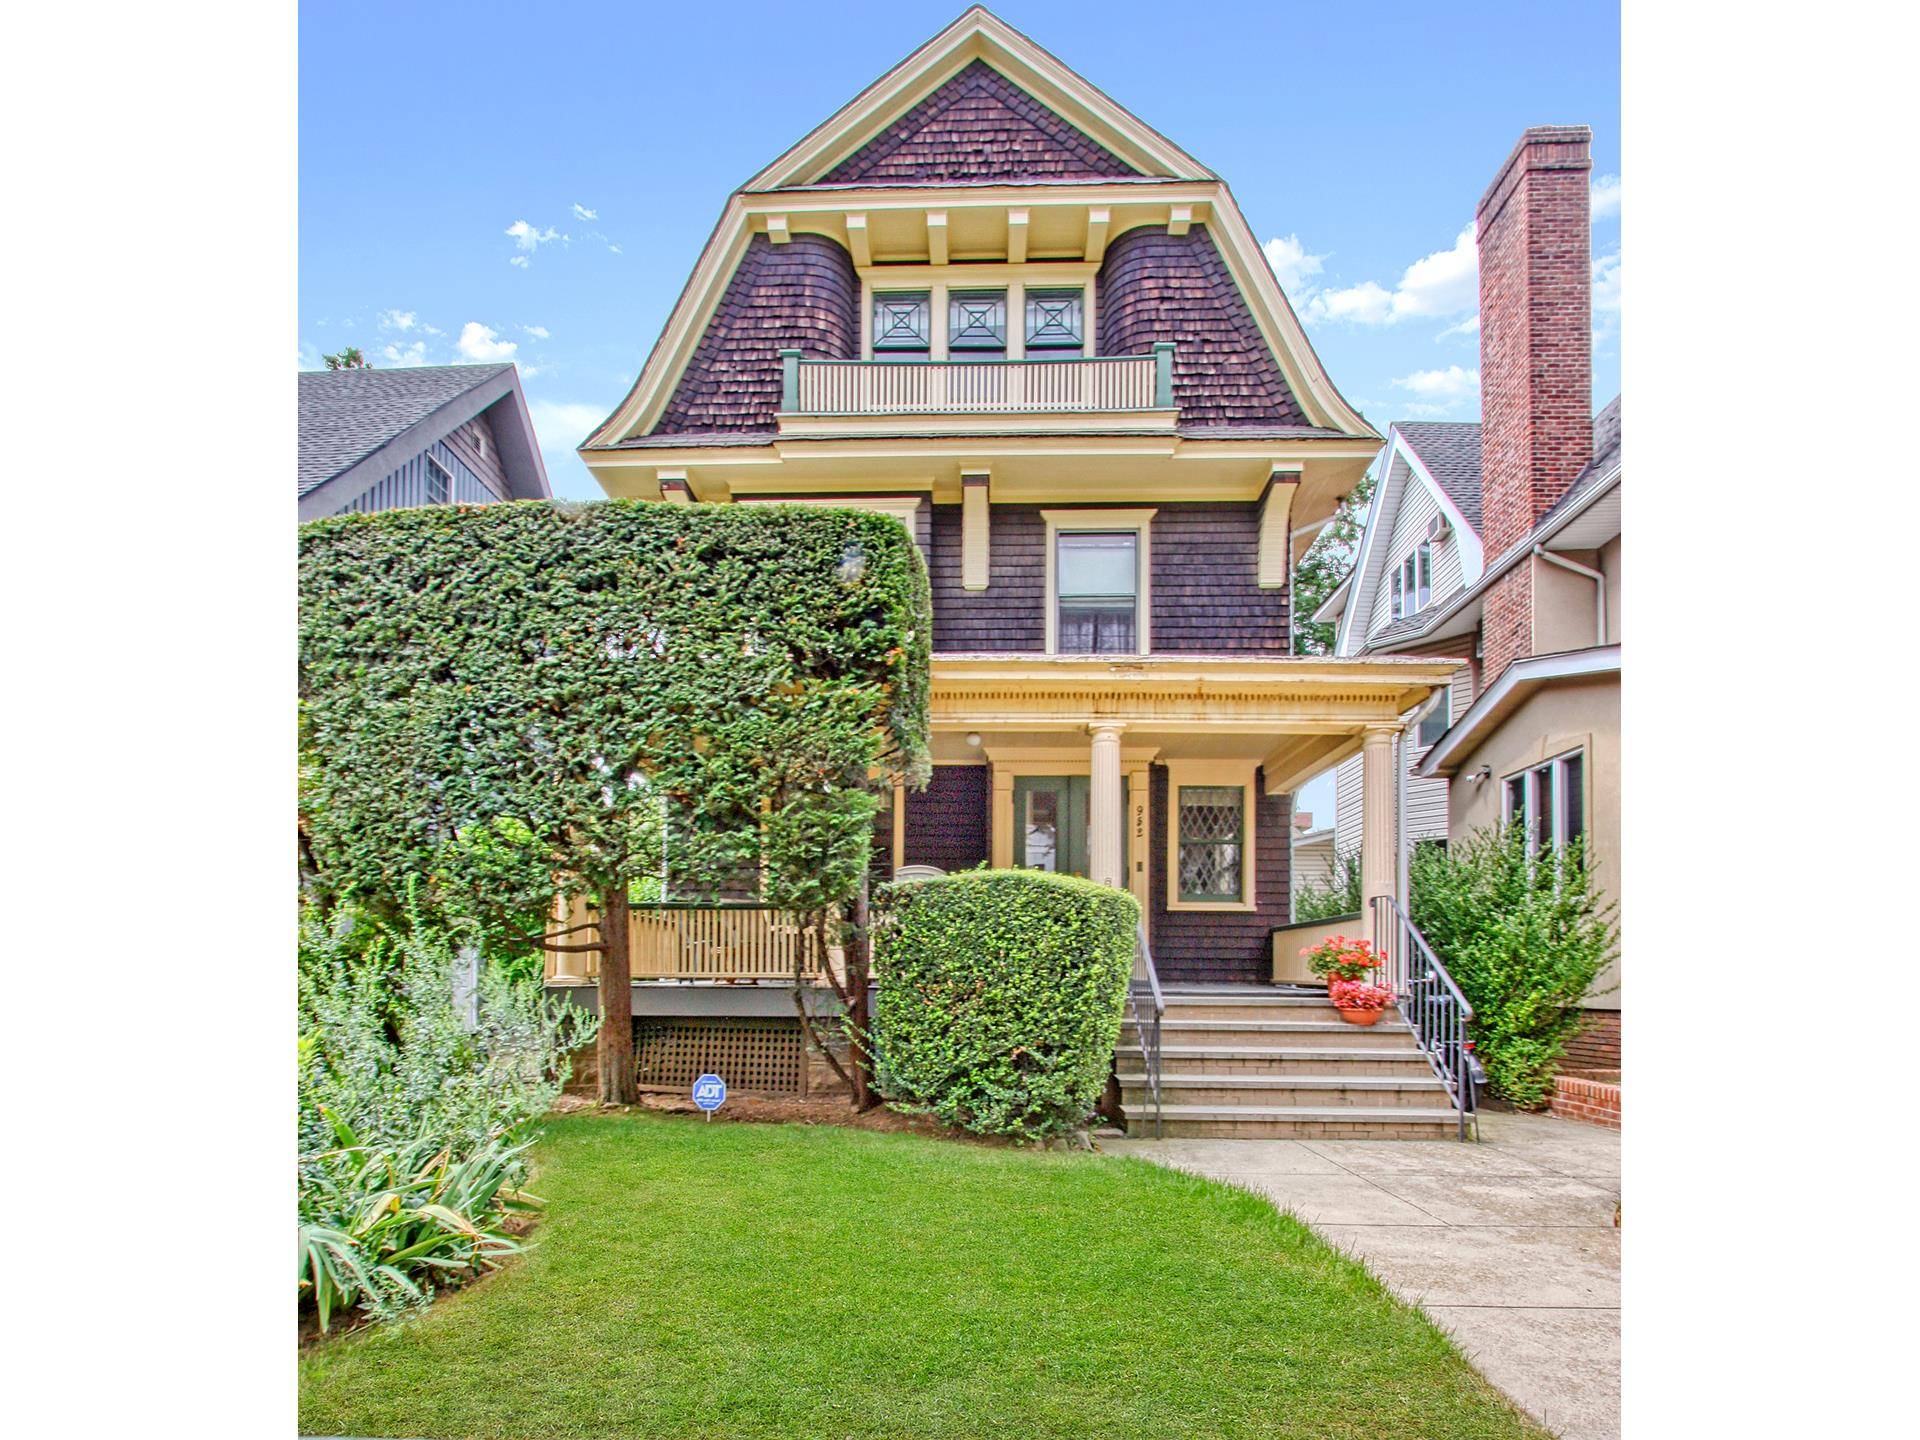 Introducing 952 East 18th Street, a charming 19th century detached victorian home located on a scenic leafy block in Midwood, nestled between Avenue I amp ; J.